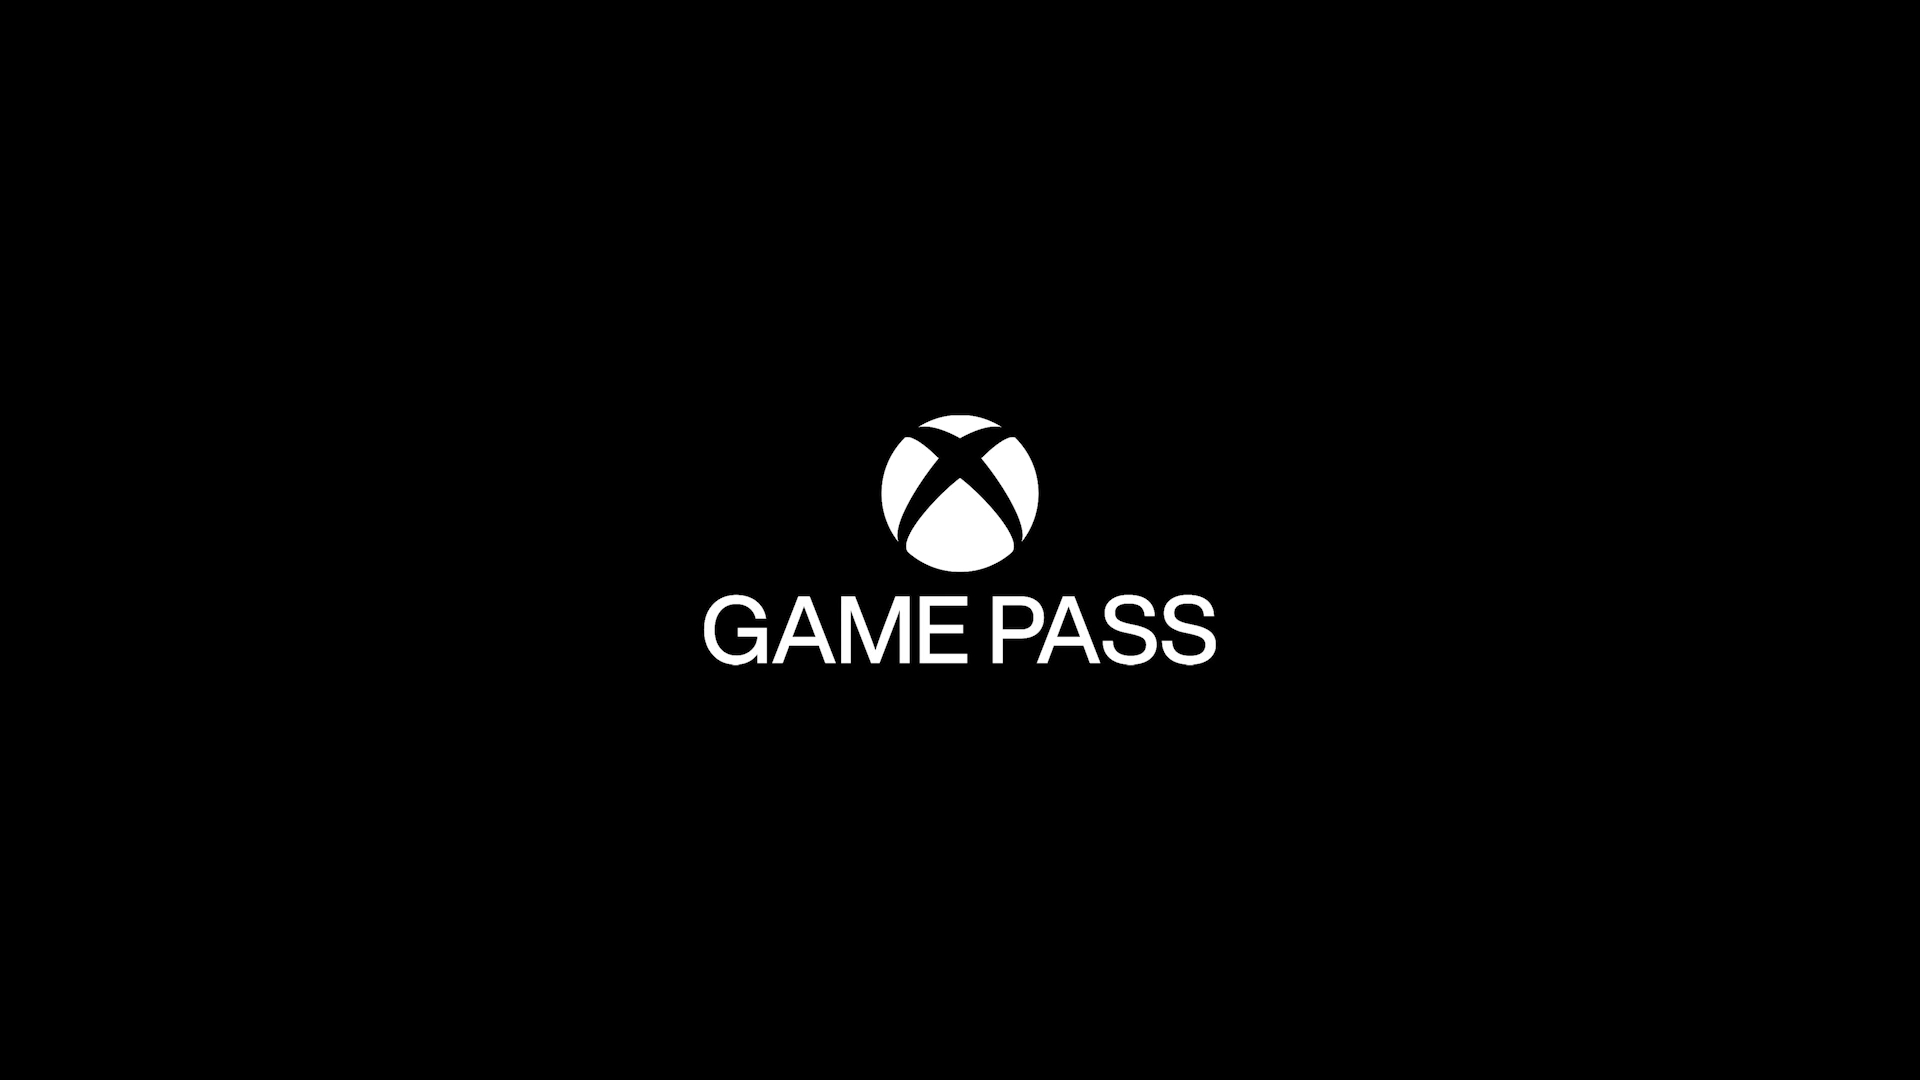 Phil Spencer Says No To Xbox Game Pass Exclusives 